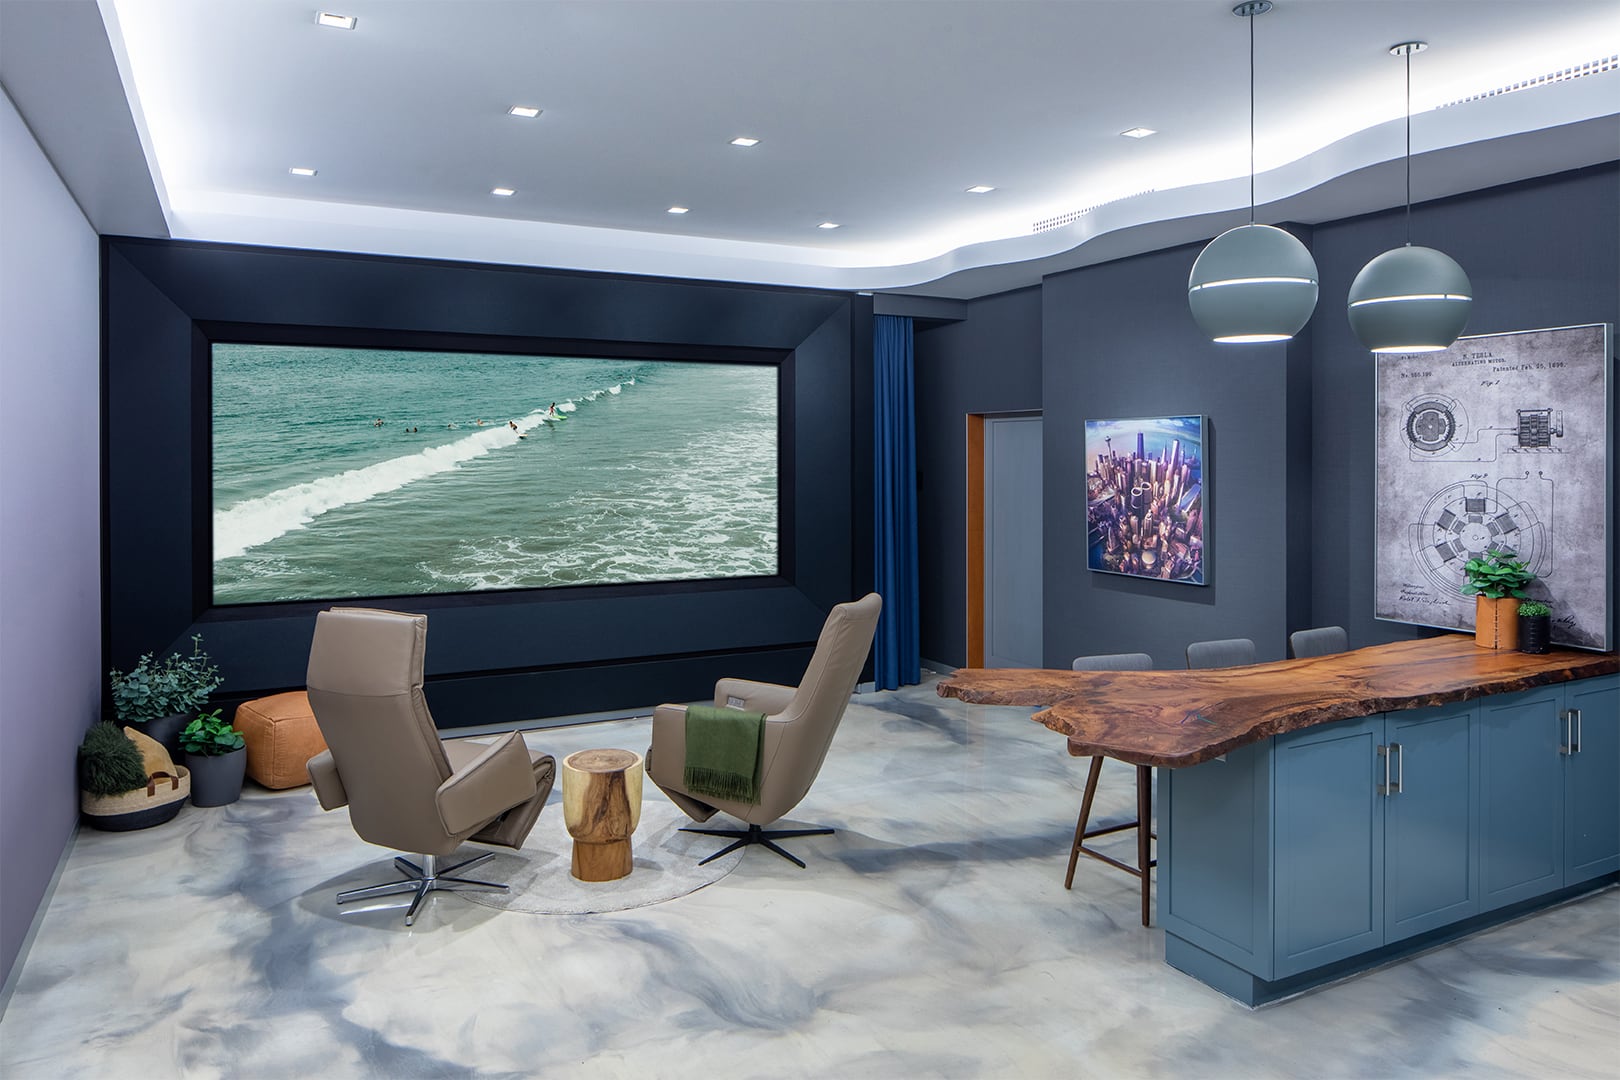 In a cool white-light setting, the Global Wave Showroom presents a captivating ocean view on its theater screen, while luxurious chairs face the display, and a meticulously crafted wooden island takes center stage.